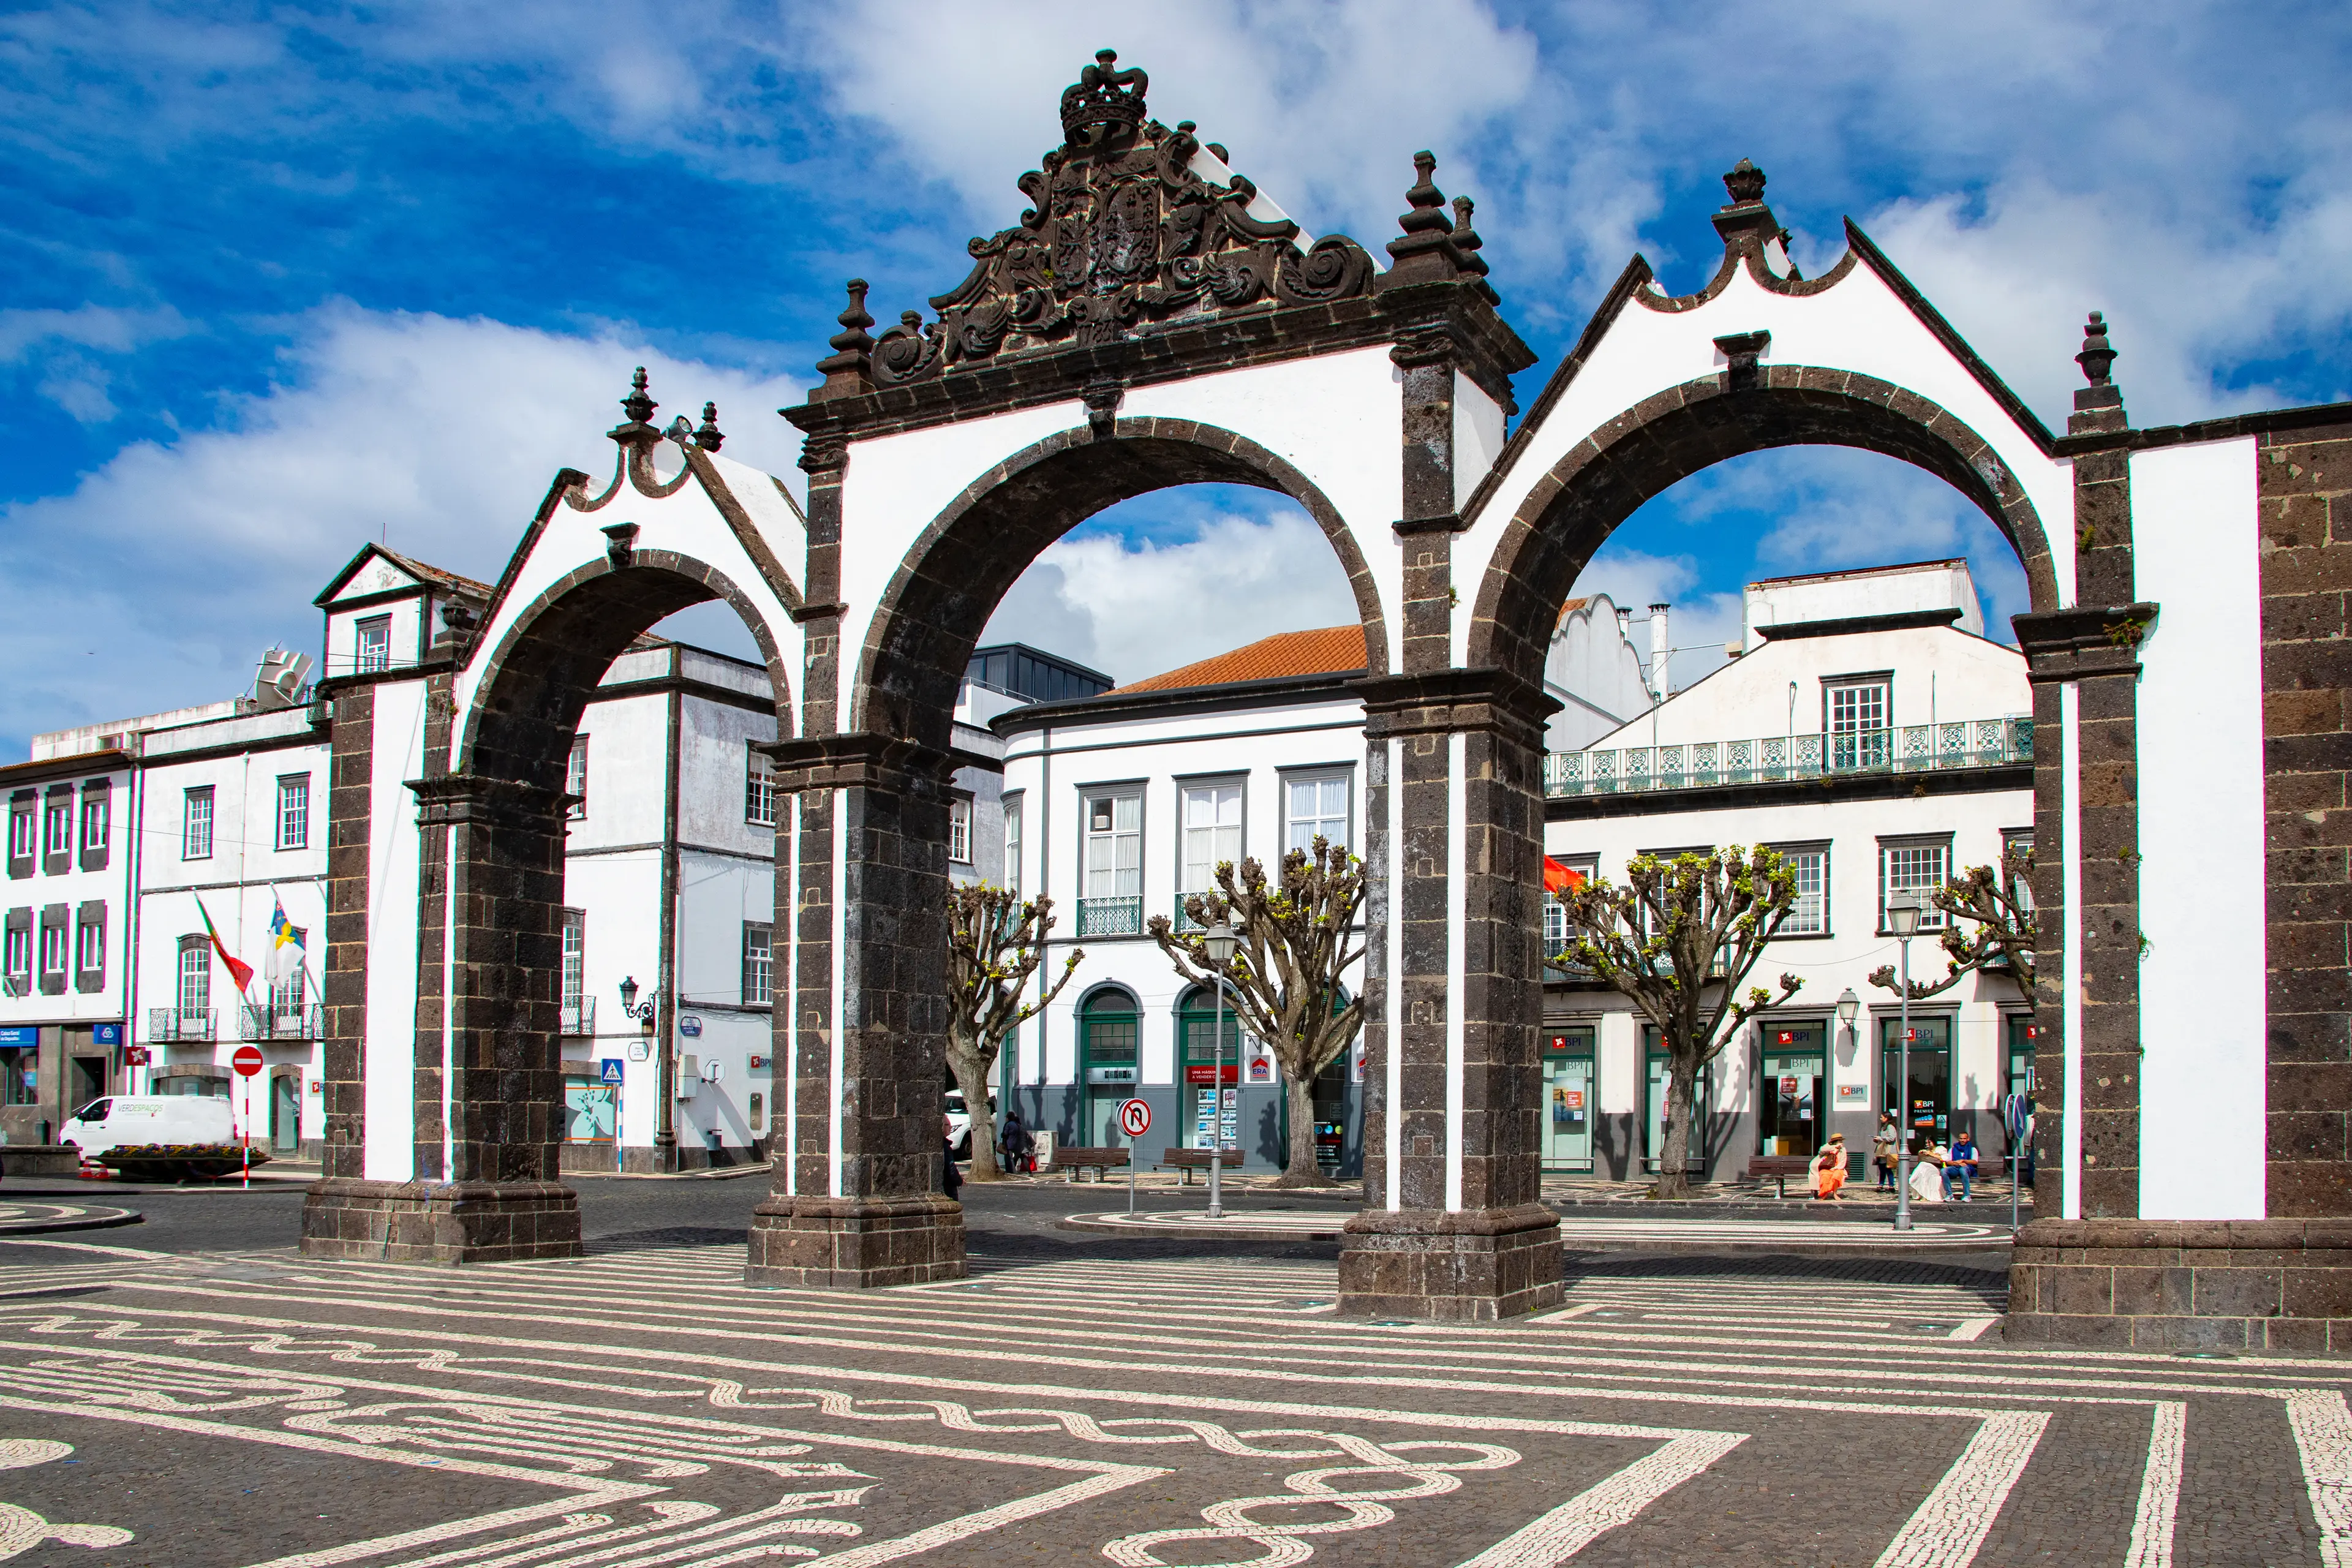 6-Day Local Experience in Azores: Food, Wine & Outdoor Adventure with Friends